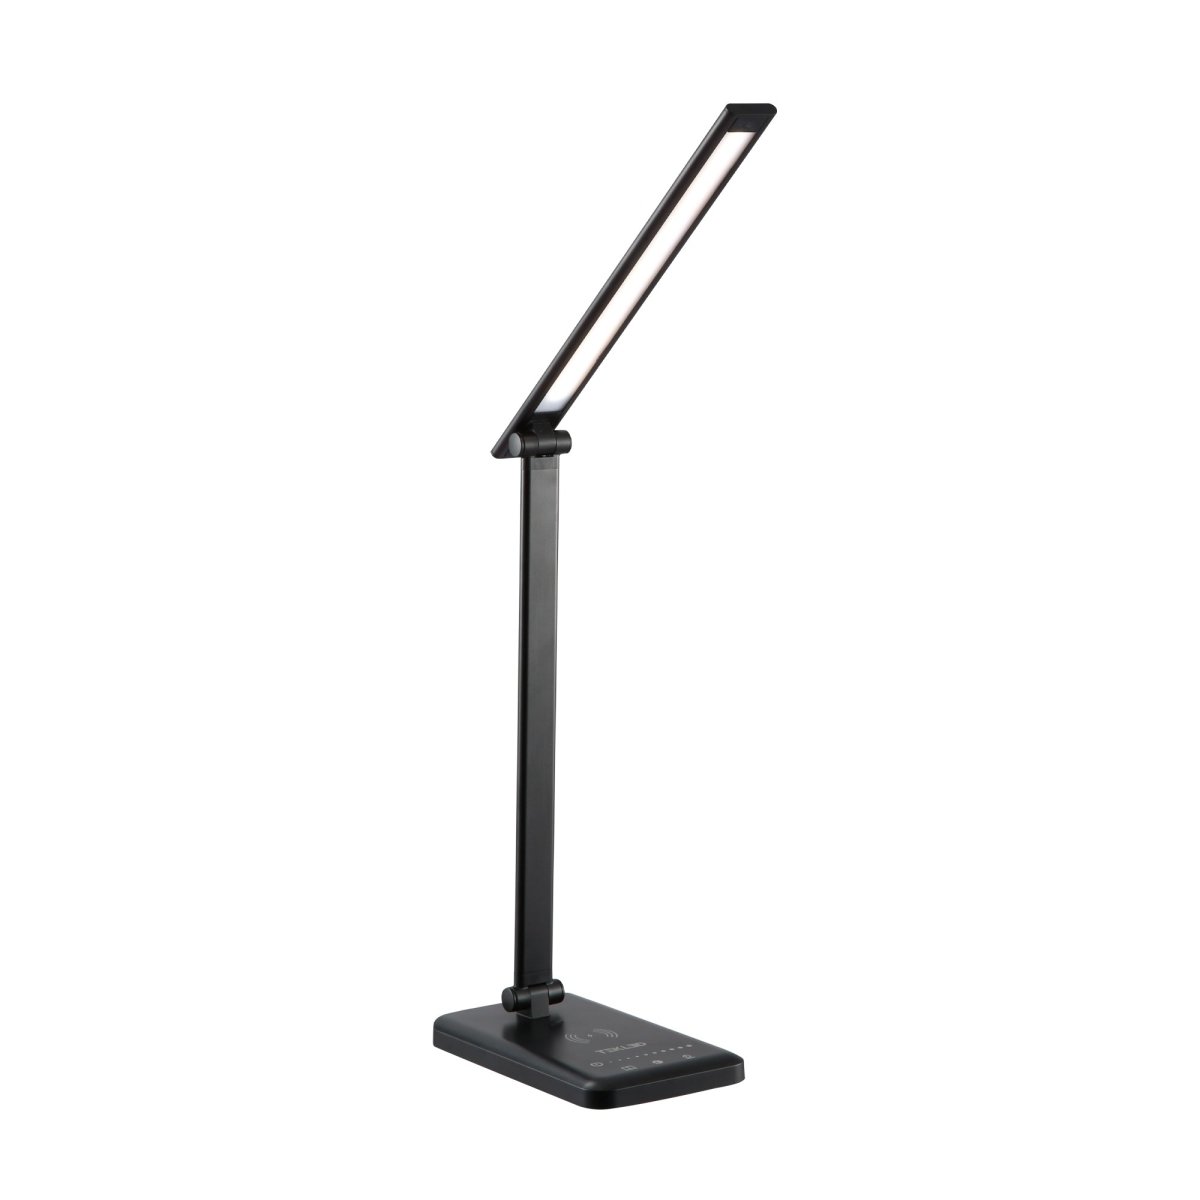 Main image of Dingo Silver Desk Light Dimmable and Colour Modes with Wireless Phone Charger | TEKLED 130-03614